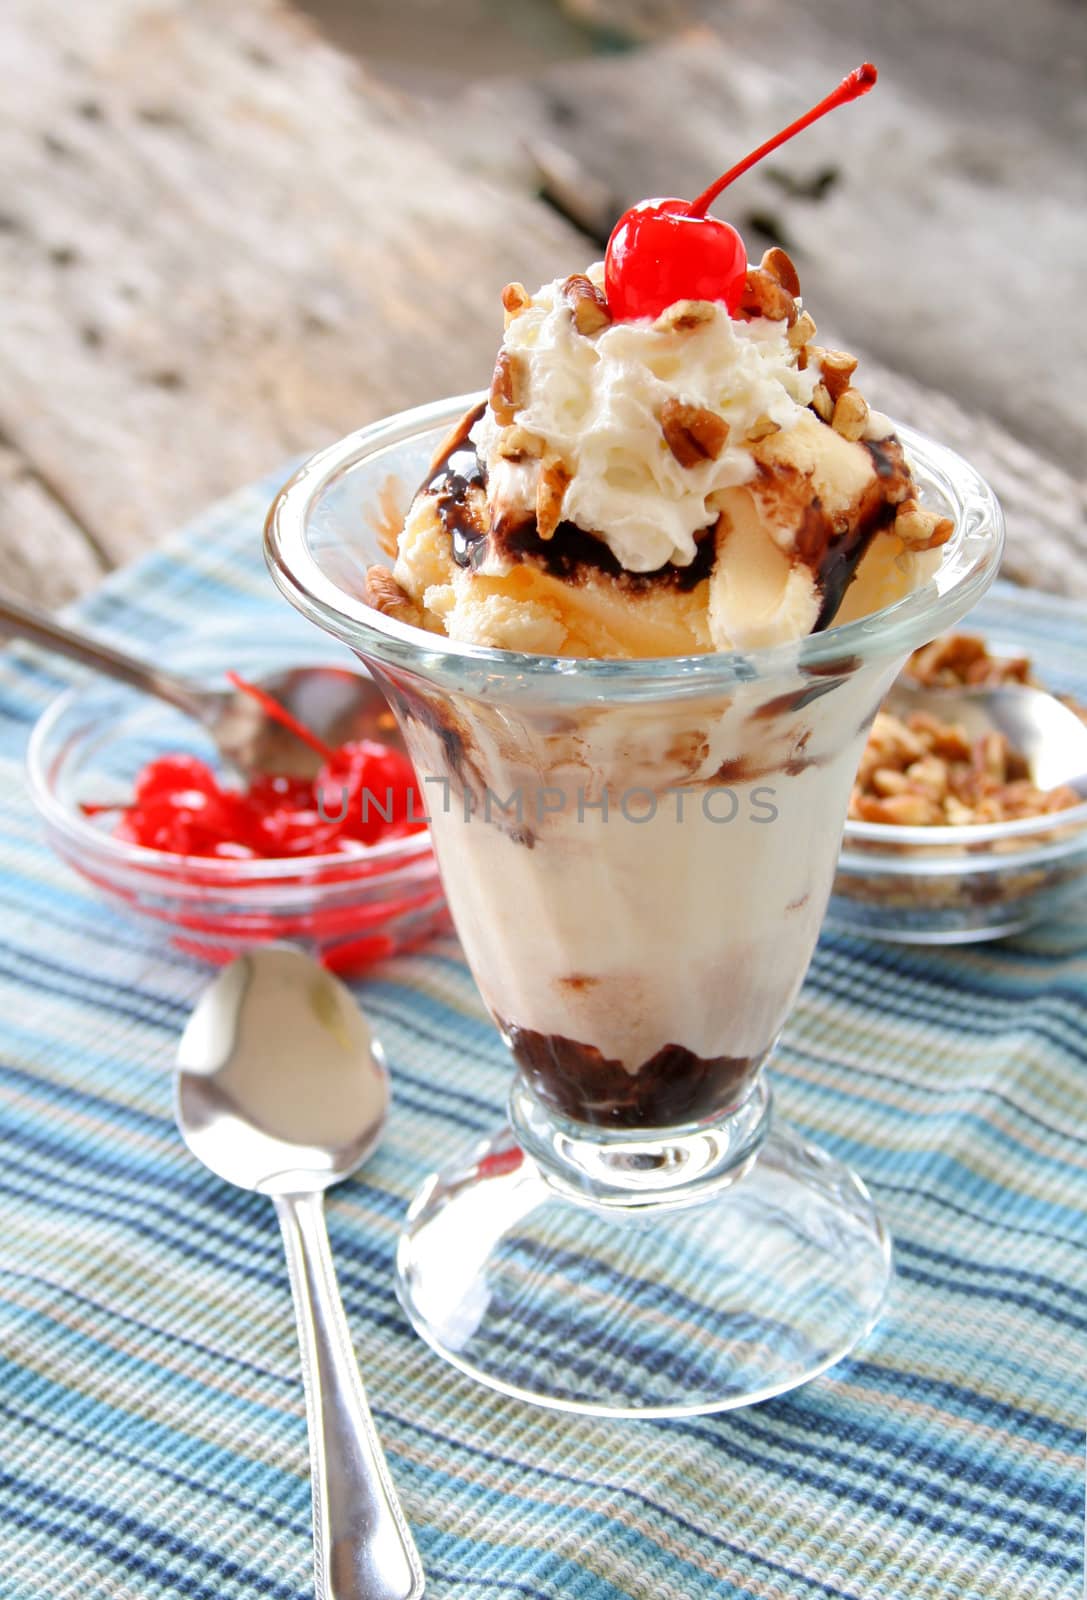 A hot fudge sundae with toppings.